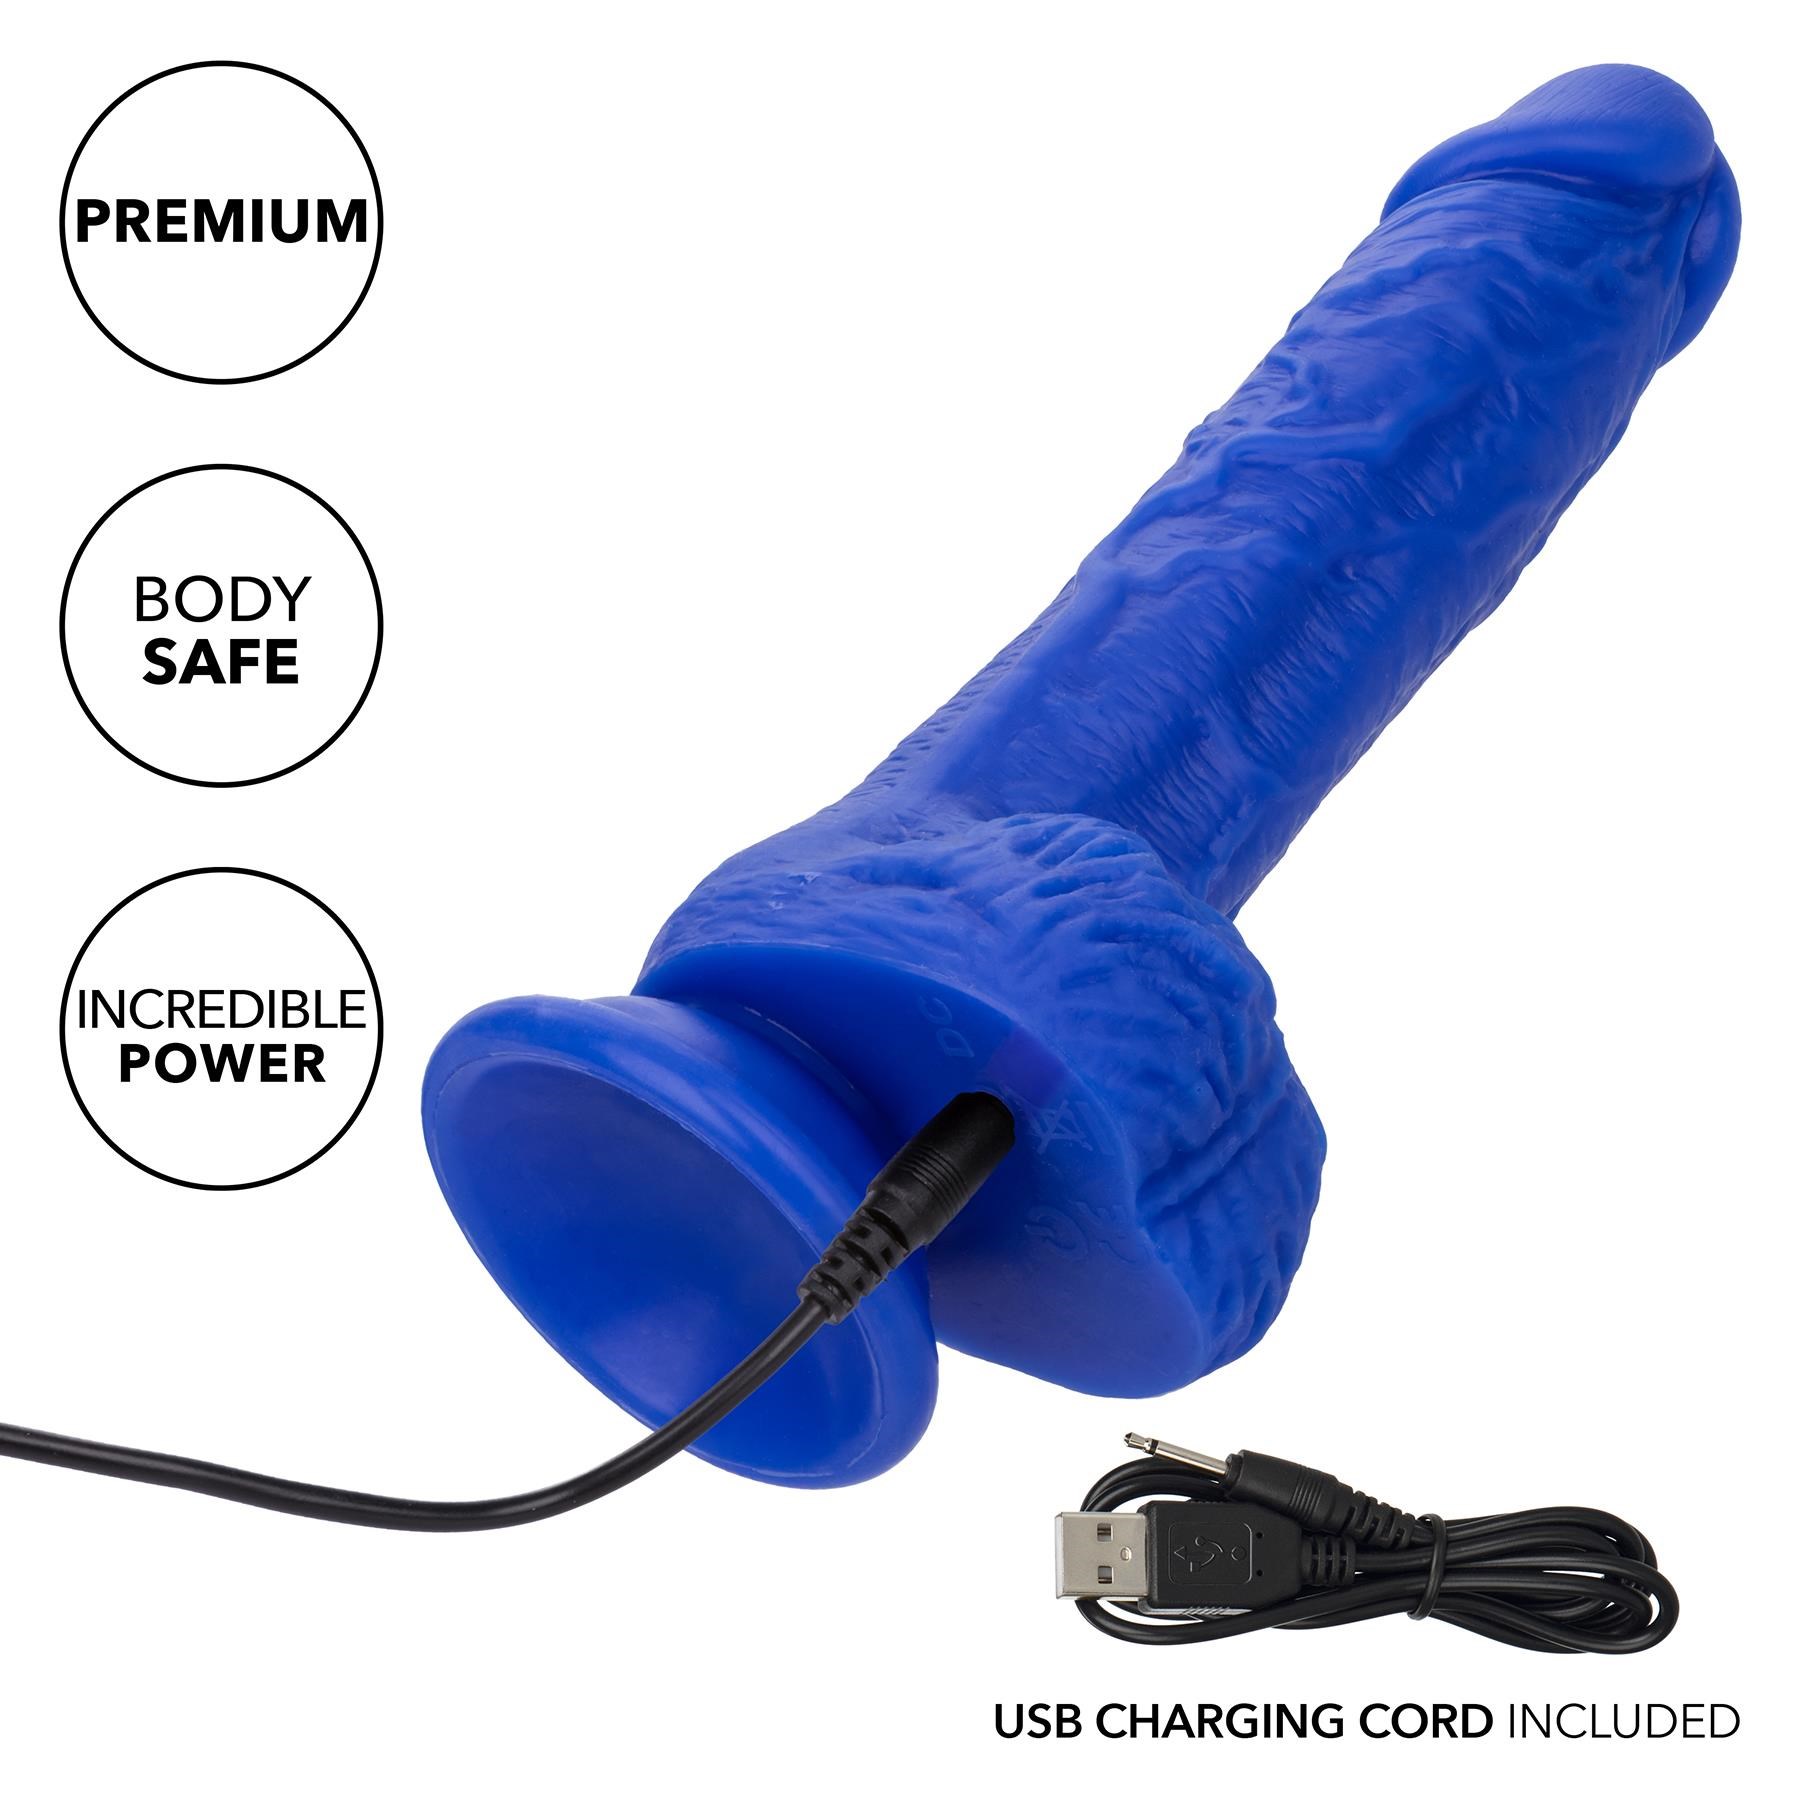 Admiral 7 Inch Vibrating Sailor Dildo - Showing Where Charging Cable is Placed